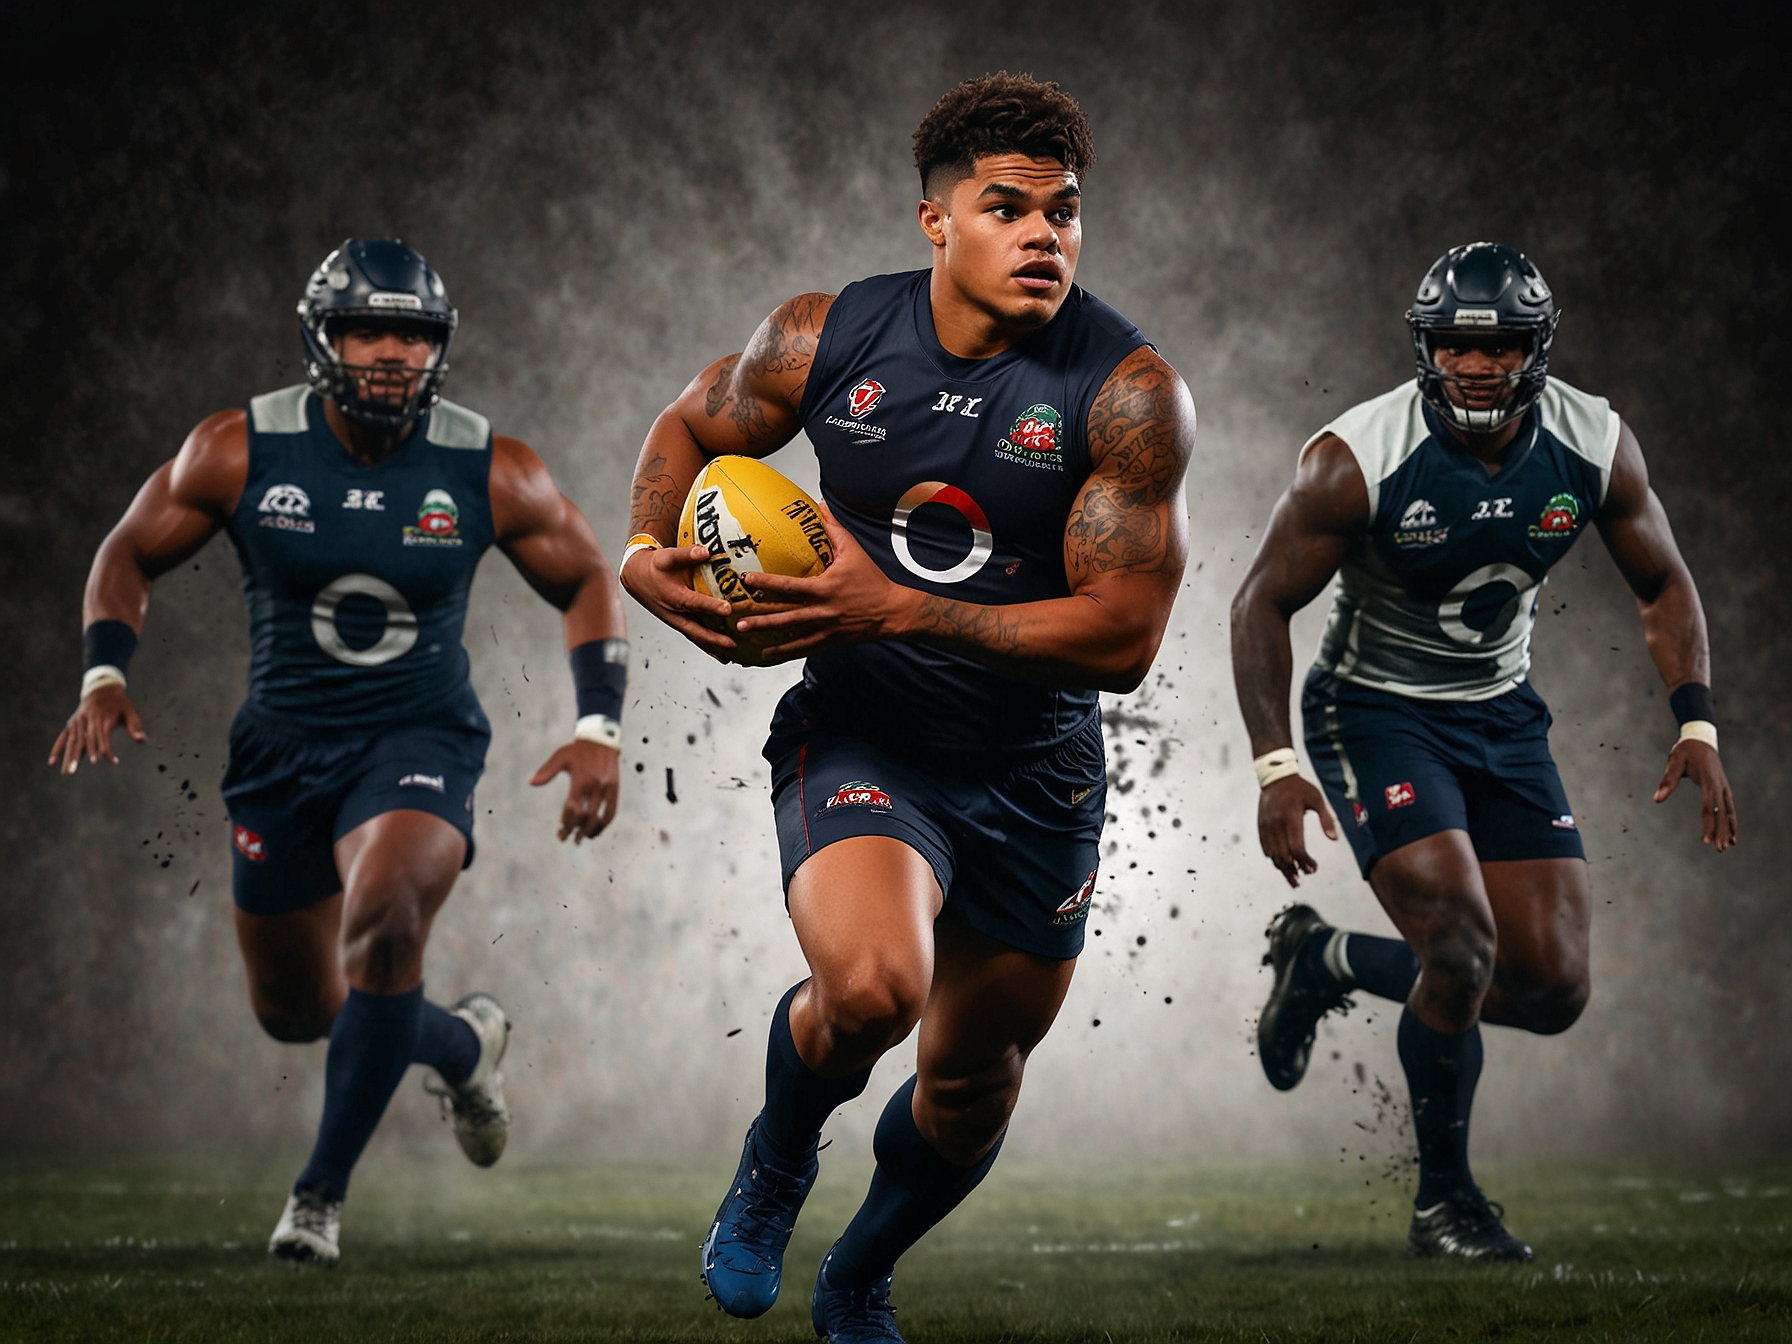 Latrell Mitchell breaks through the defensive line, using his impressive speed and size to outmaneuver multiple defenders, showcasing his ability to create scoring opportunities.